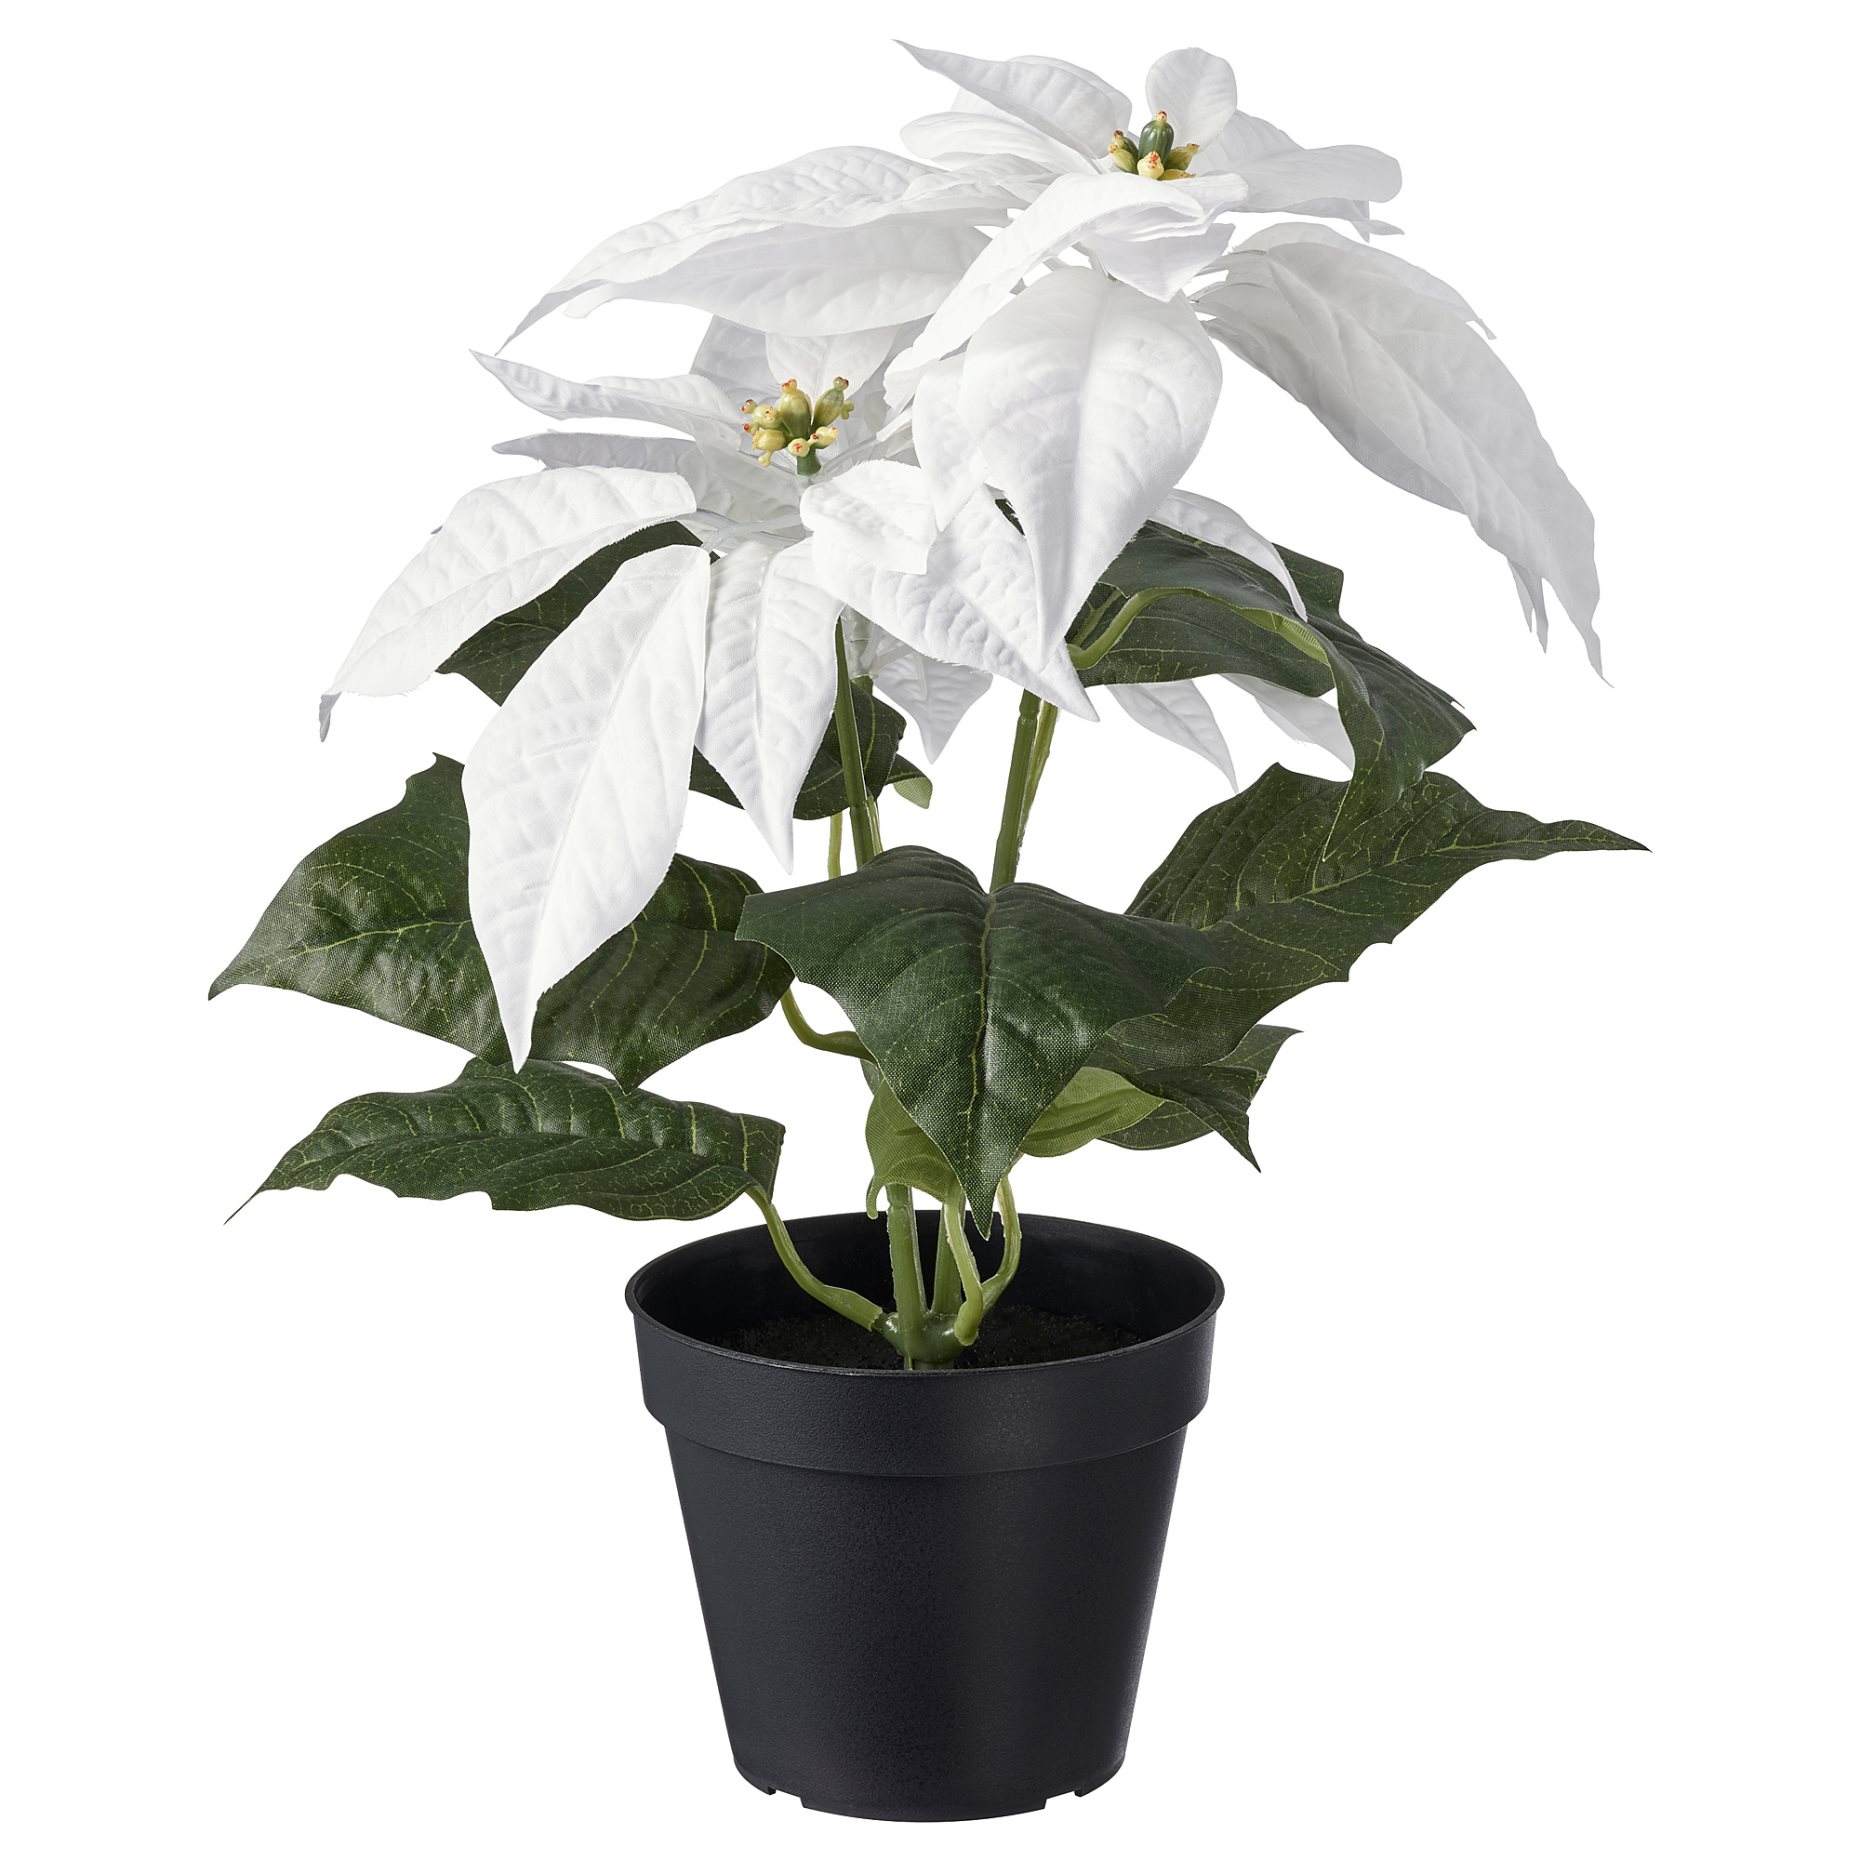 VINTERFINT, artificial potted plant/in/outdoor Poinsettia, 12 cm, 205.621.41